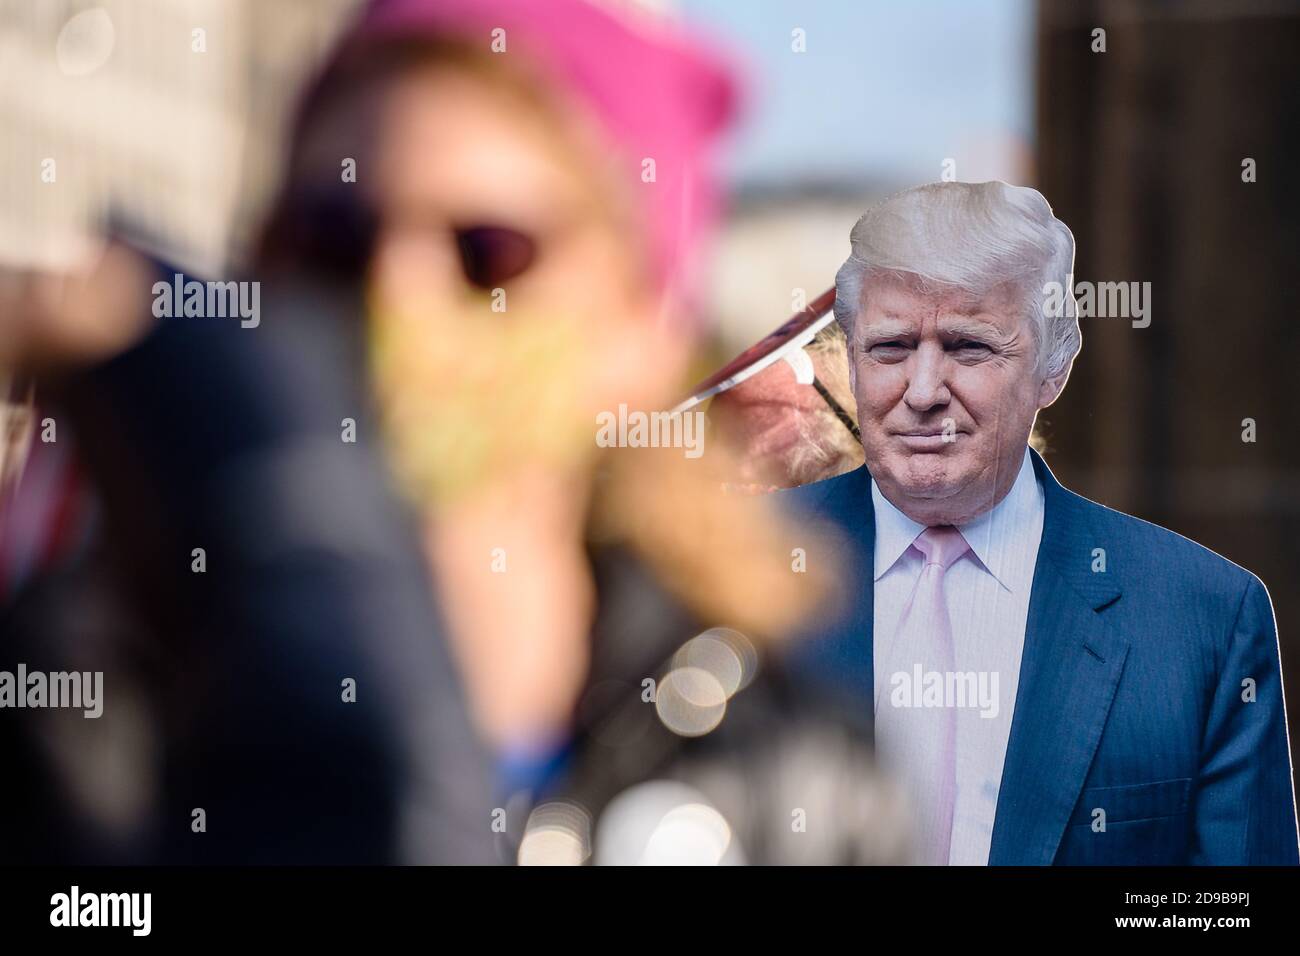 Germany, Berlin, November 04, 2020: A cardboard figure of Donald Trump, 45th and current president of the United States, can be seen behind protesters and supporters of Democratic presidential candidate former Vice President JOE BIDEN next to the Brandenburg Gate in Central Berlin during a rally unter the motto 'Count the Votes! Rally for Fair Elections in the USA' organized by the Democrats Abroad, the official organization of the Democratic Party for United States citizens living permanently or temporarily outside the United States, during the pending final vote count for the 2020 United Sta Stock Photo